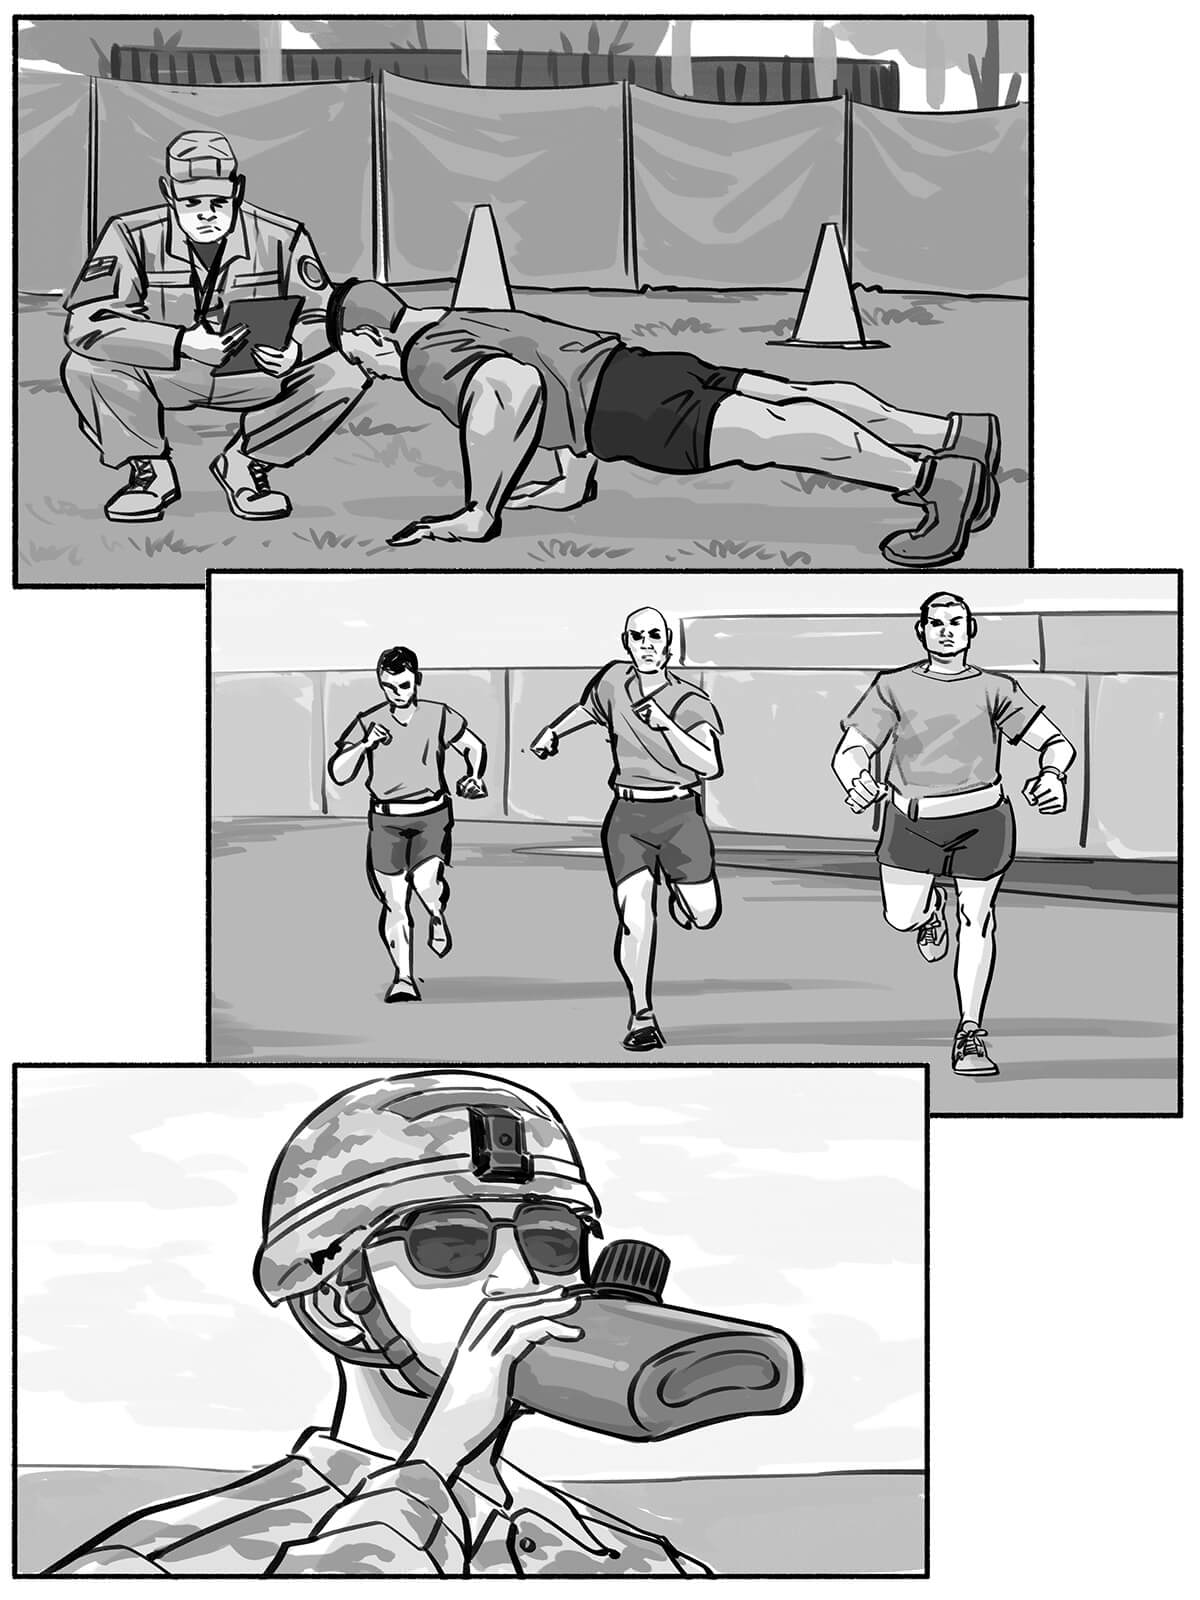 Physical routine in the US military.